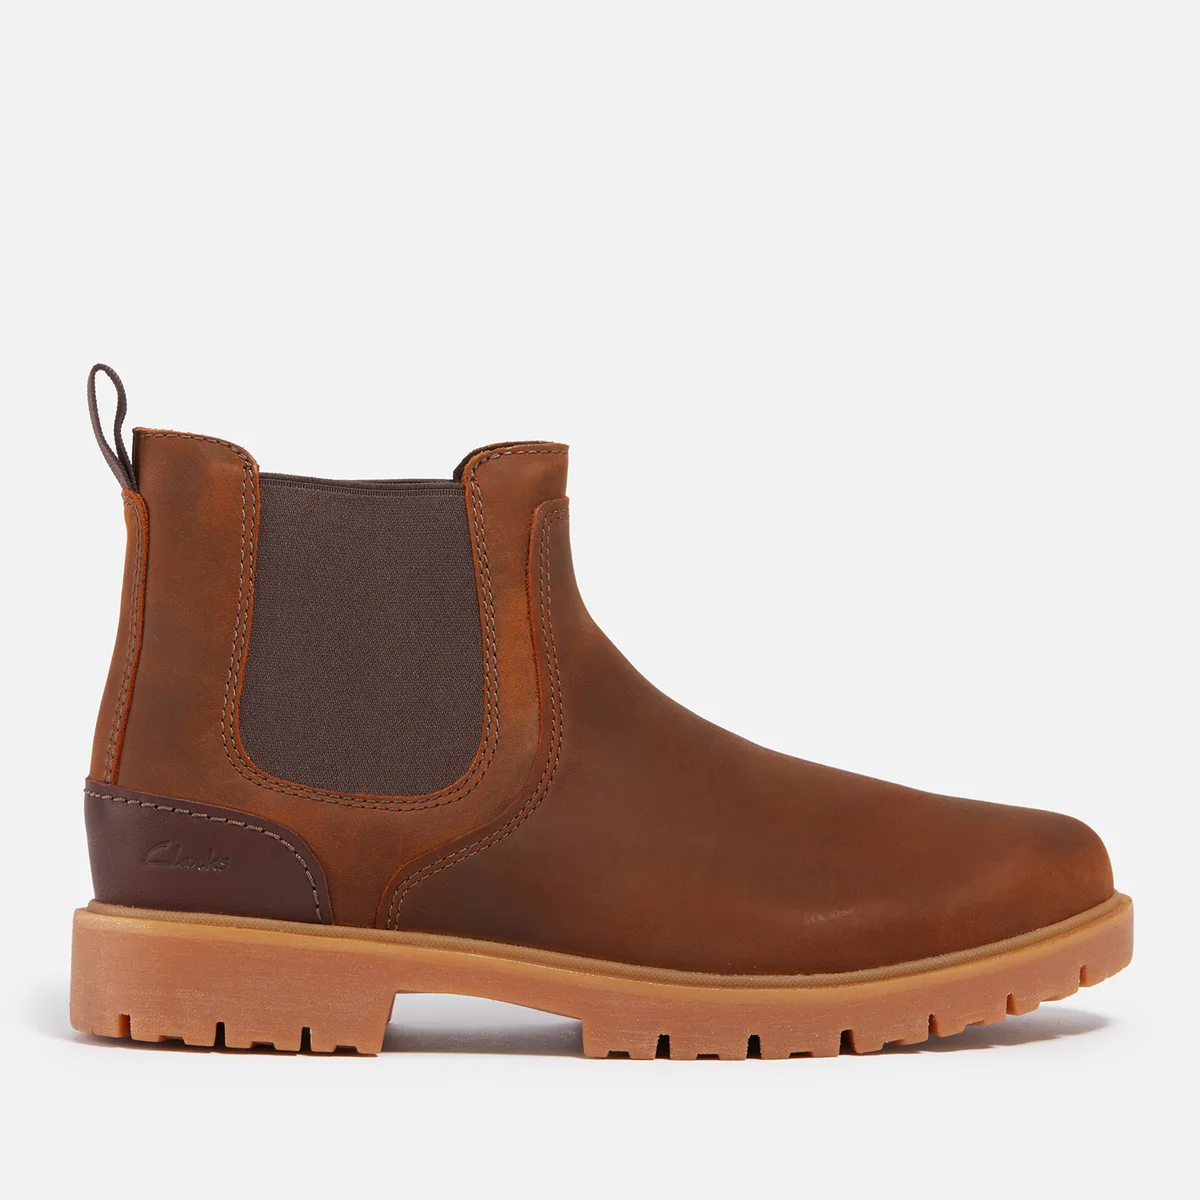 Clarks Men's Rossdale Top Leather Boots Image 1